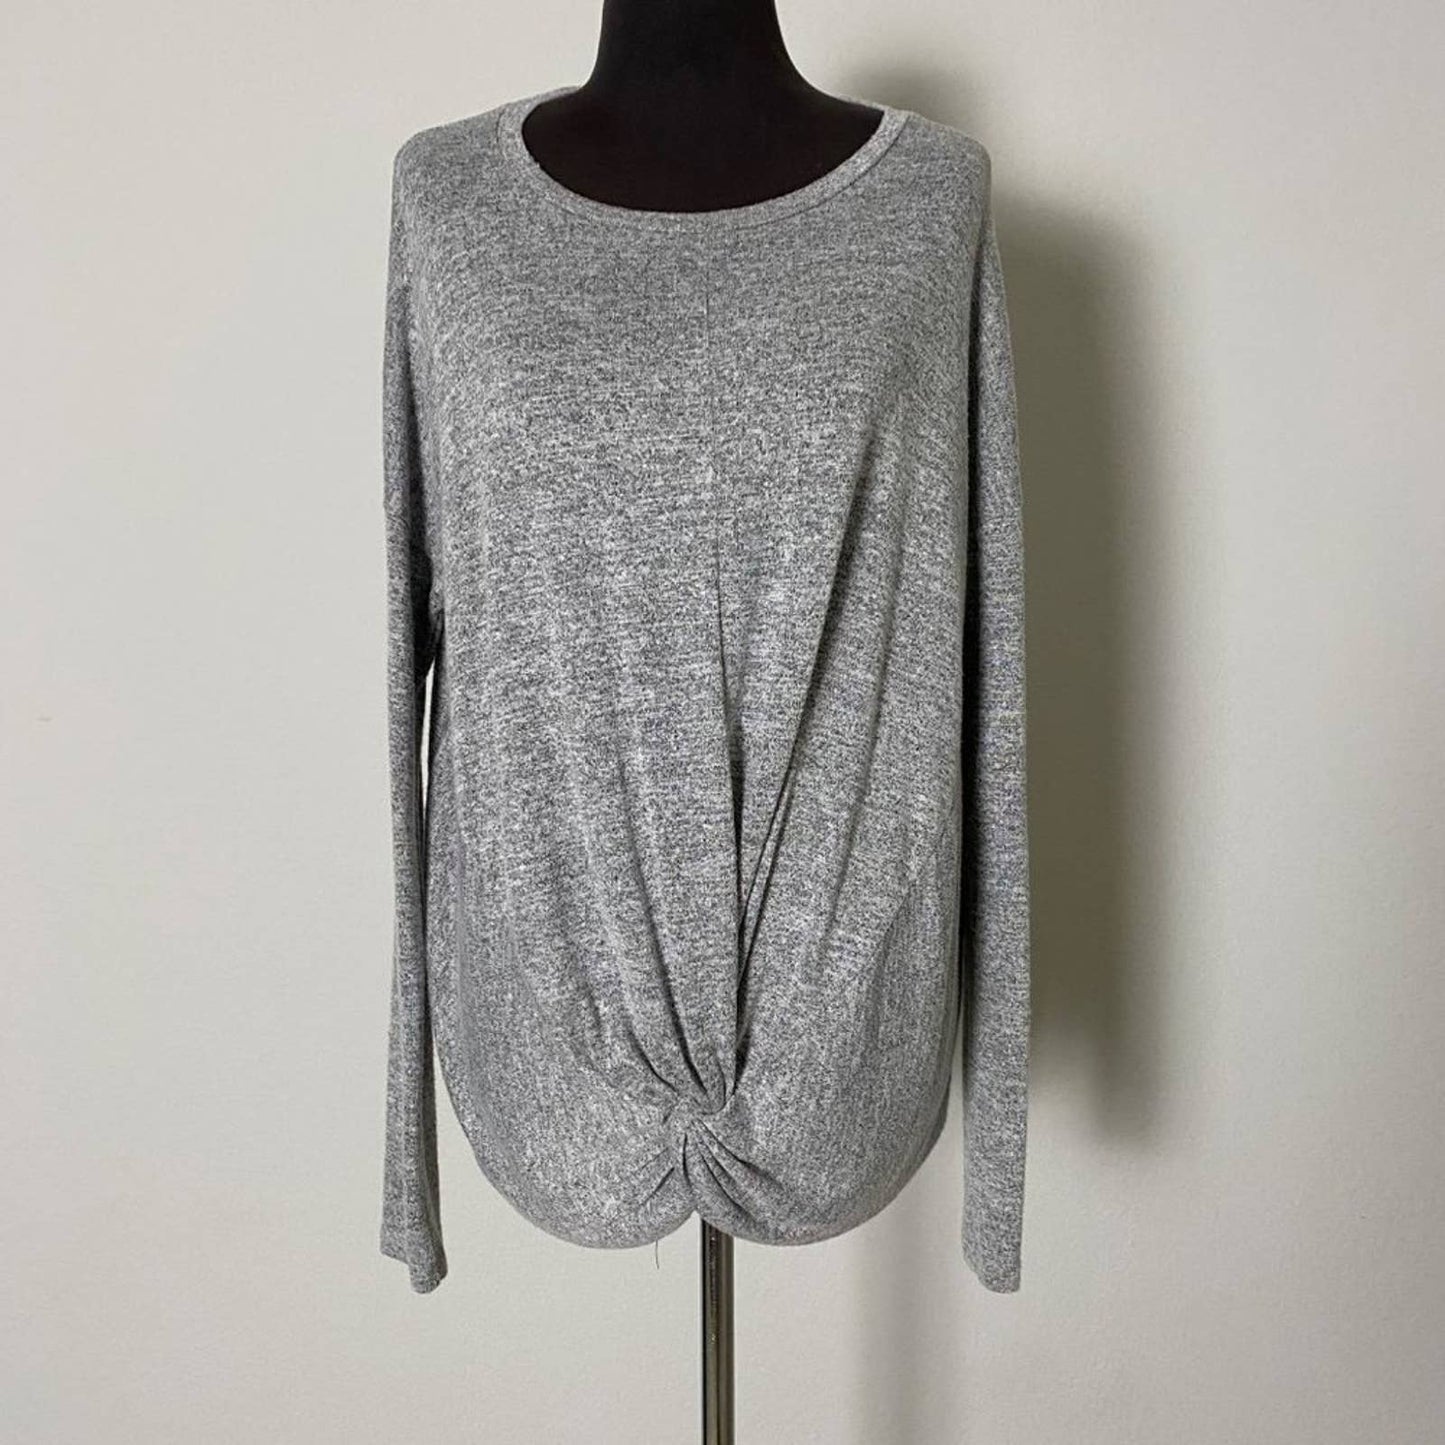 Banana Republic sz M Long sleeve tie detail pull over knit blouse